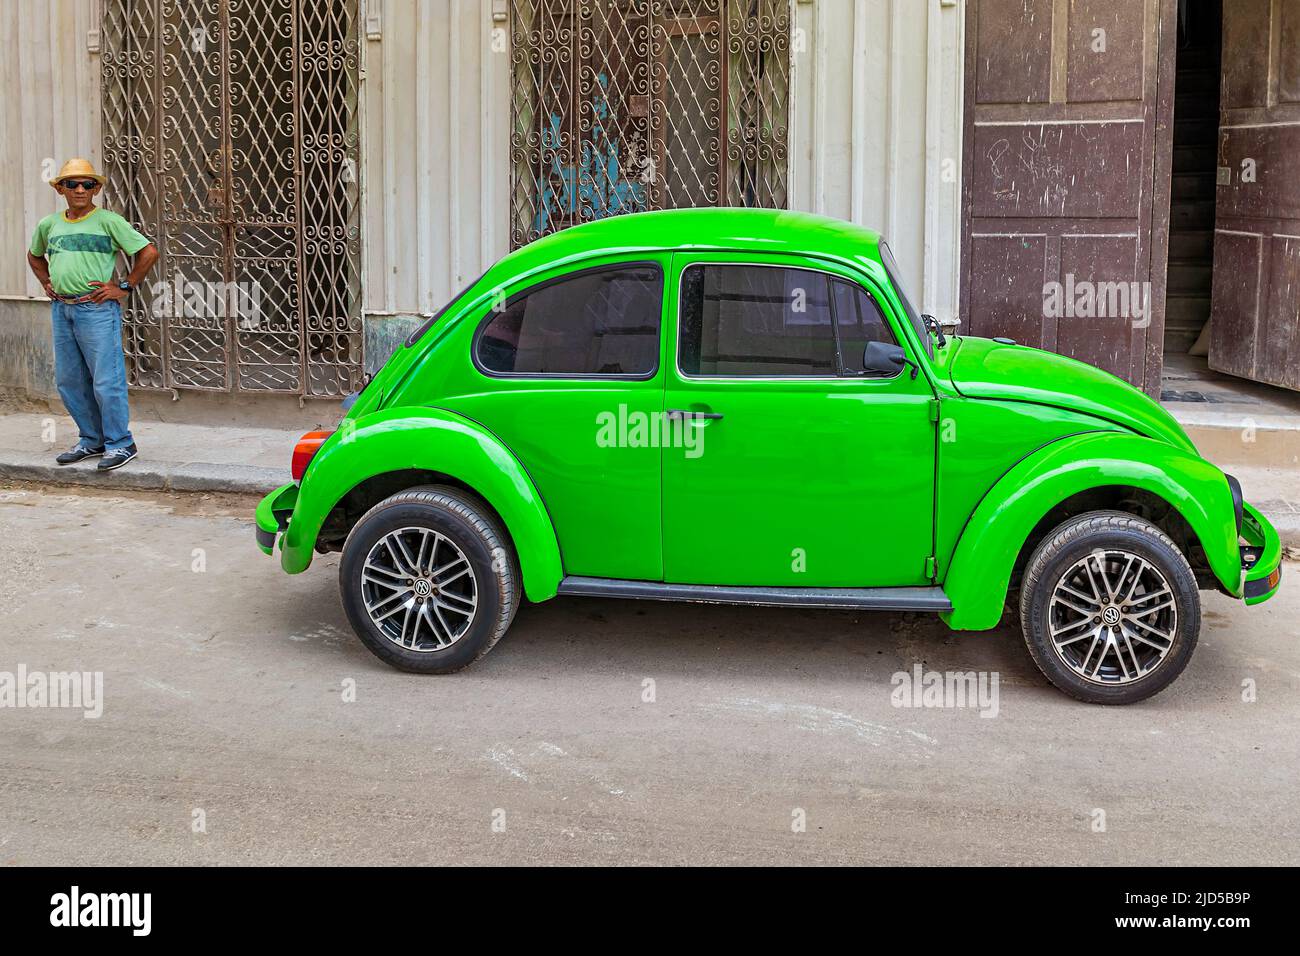 Bright green Vintage Volkswagen Beetle and Cuban man in green T-Shirt in the streets of Old Havana, Cuba Stock Photo